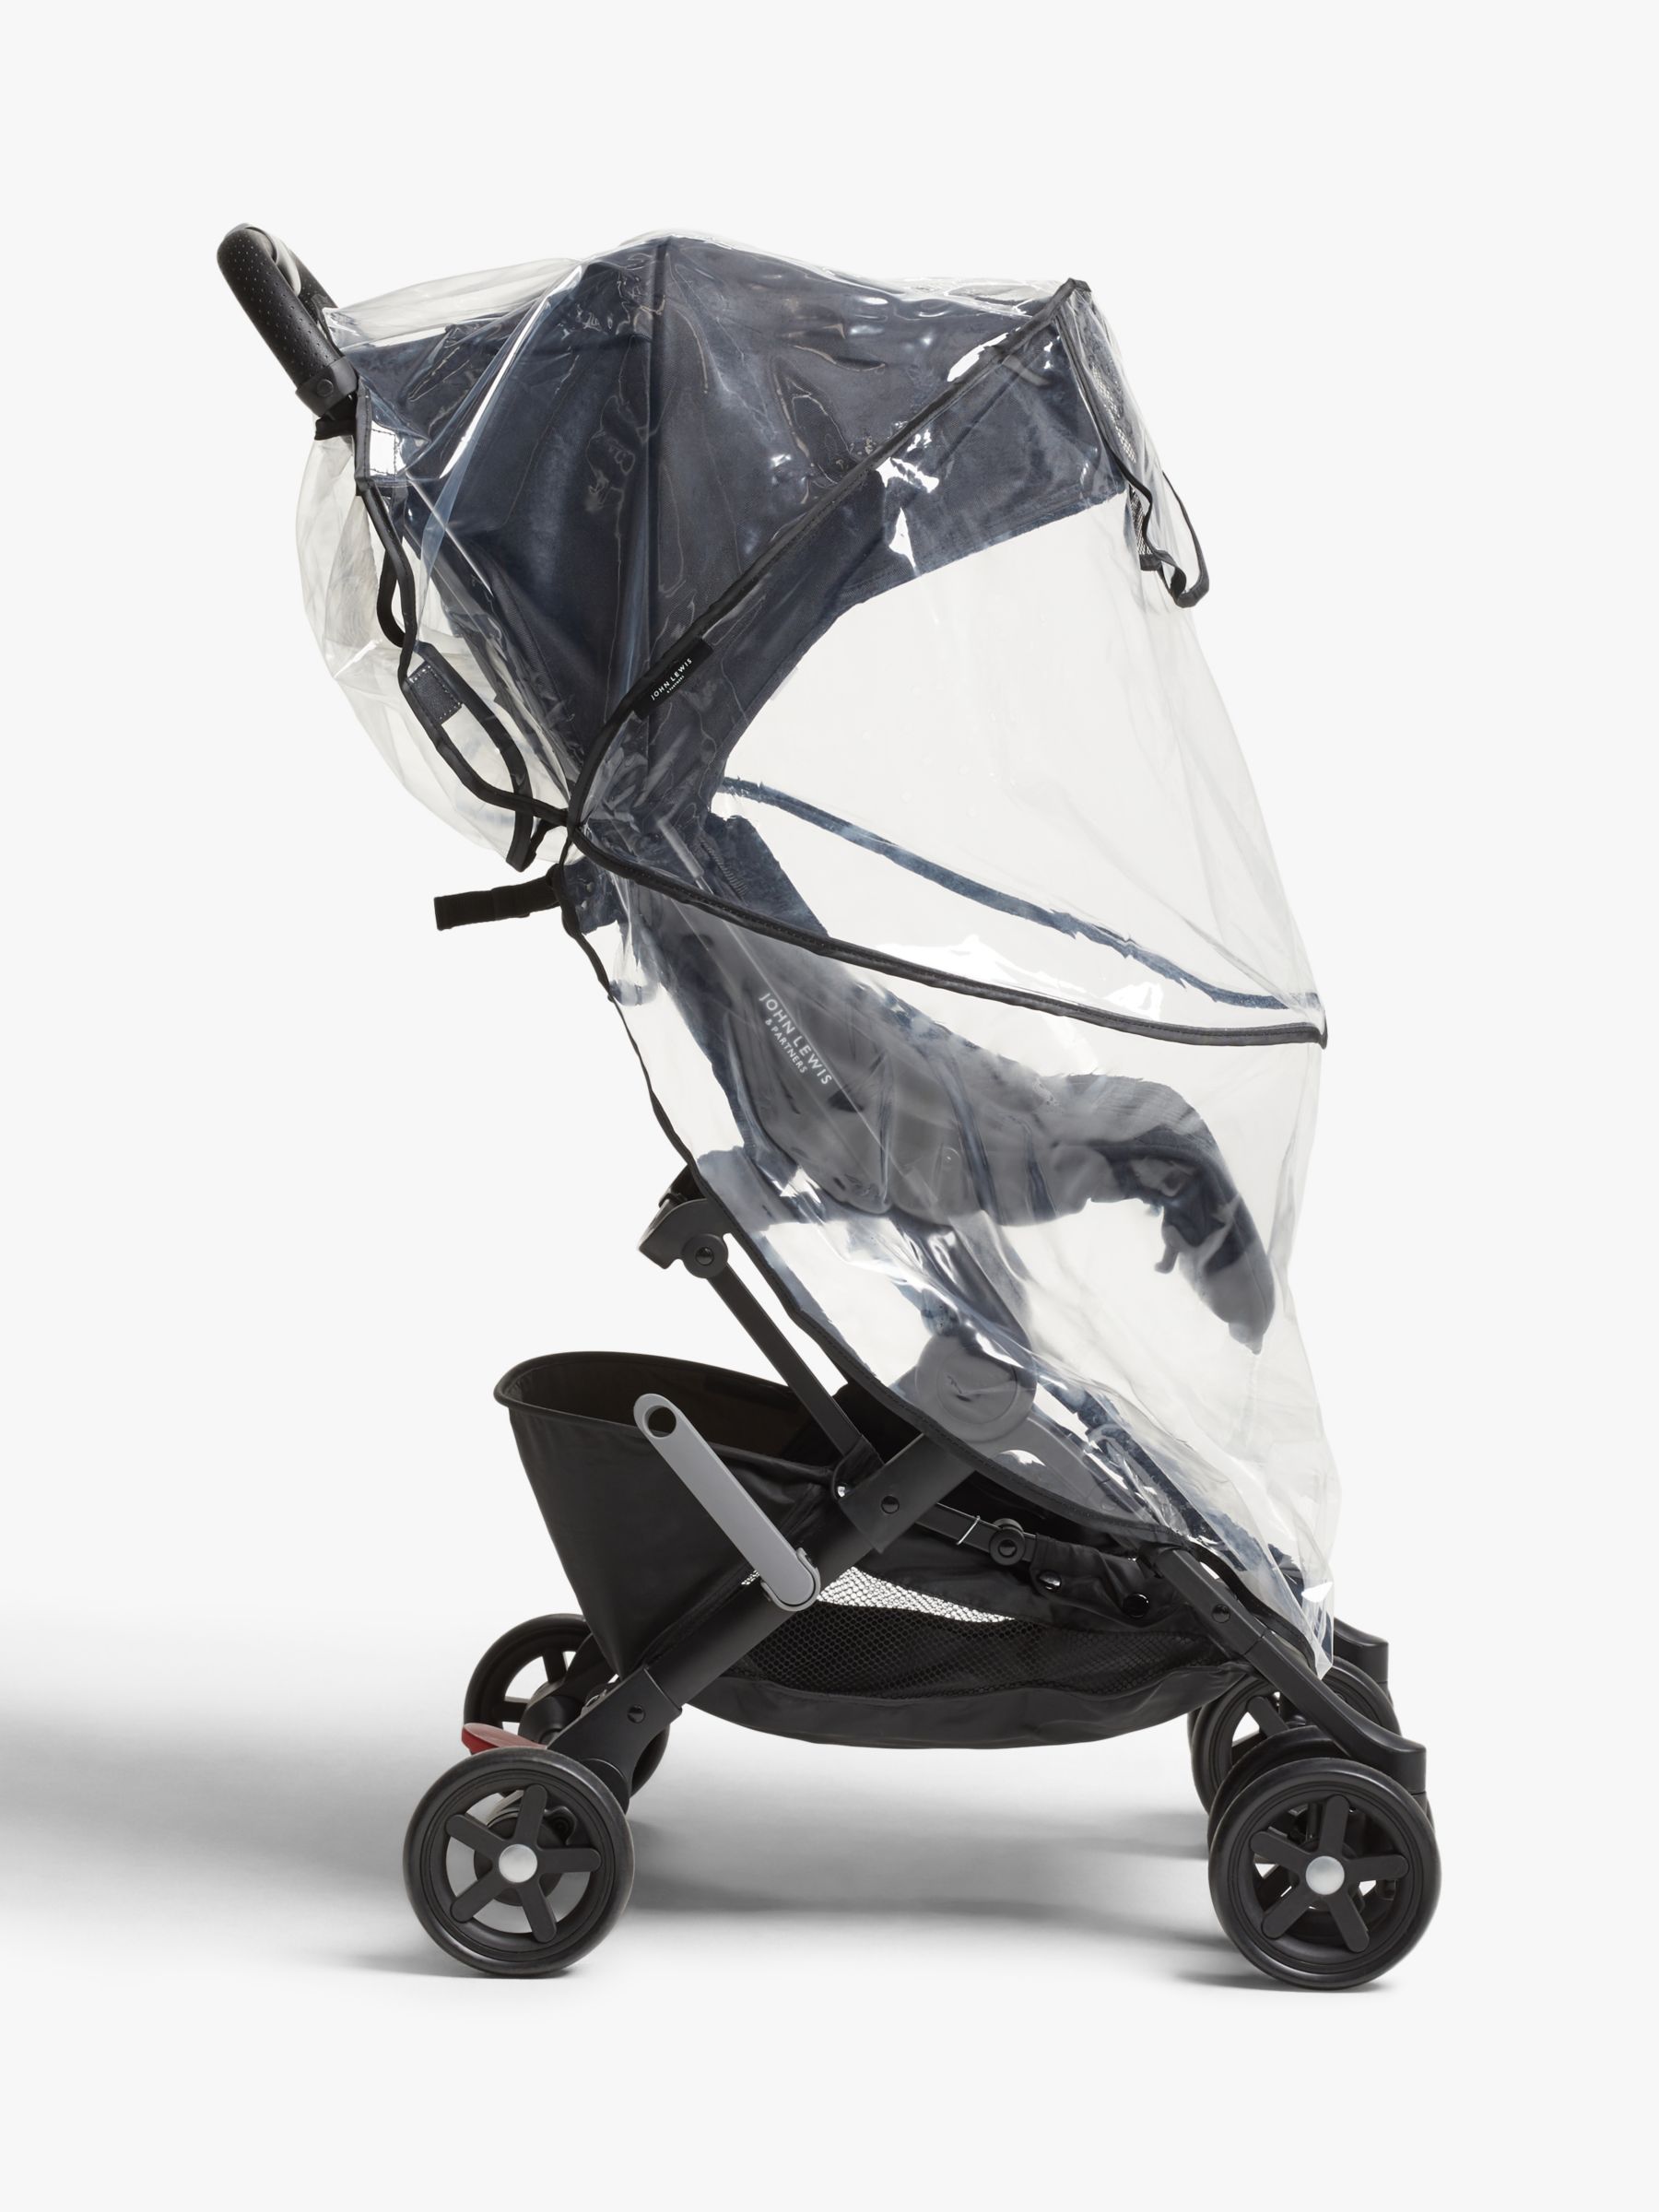  Stroller Rain Cover-Nylon Webbing Stroller Rain Cover  Universal, with Mesh Ventilation Holes Lightweight Stroller Cover,  Waterproof Windproof Baby Travel Gear, for Most Standard Size Strollers :  Baby